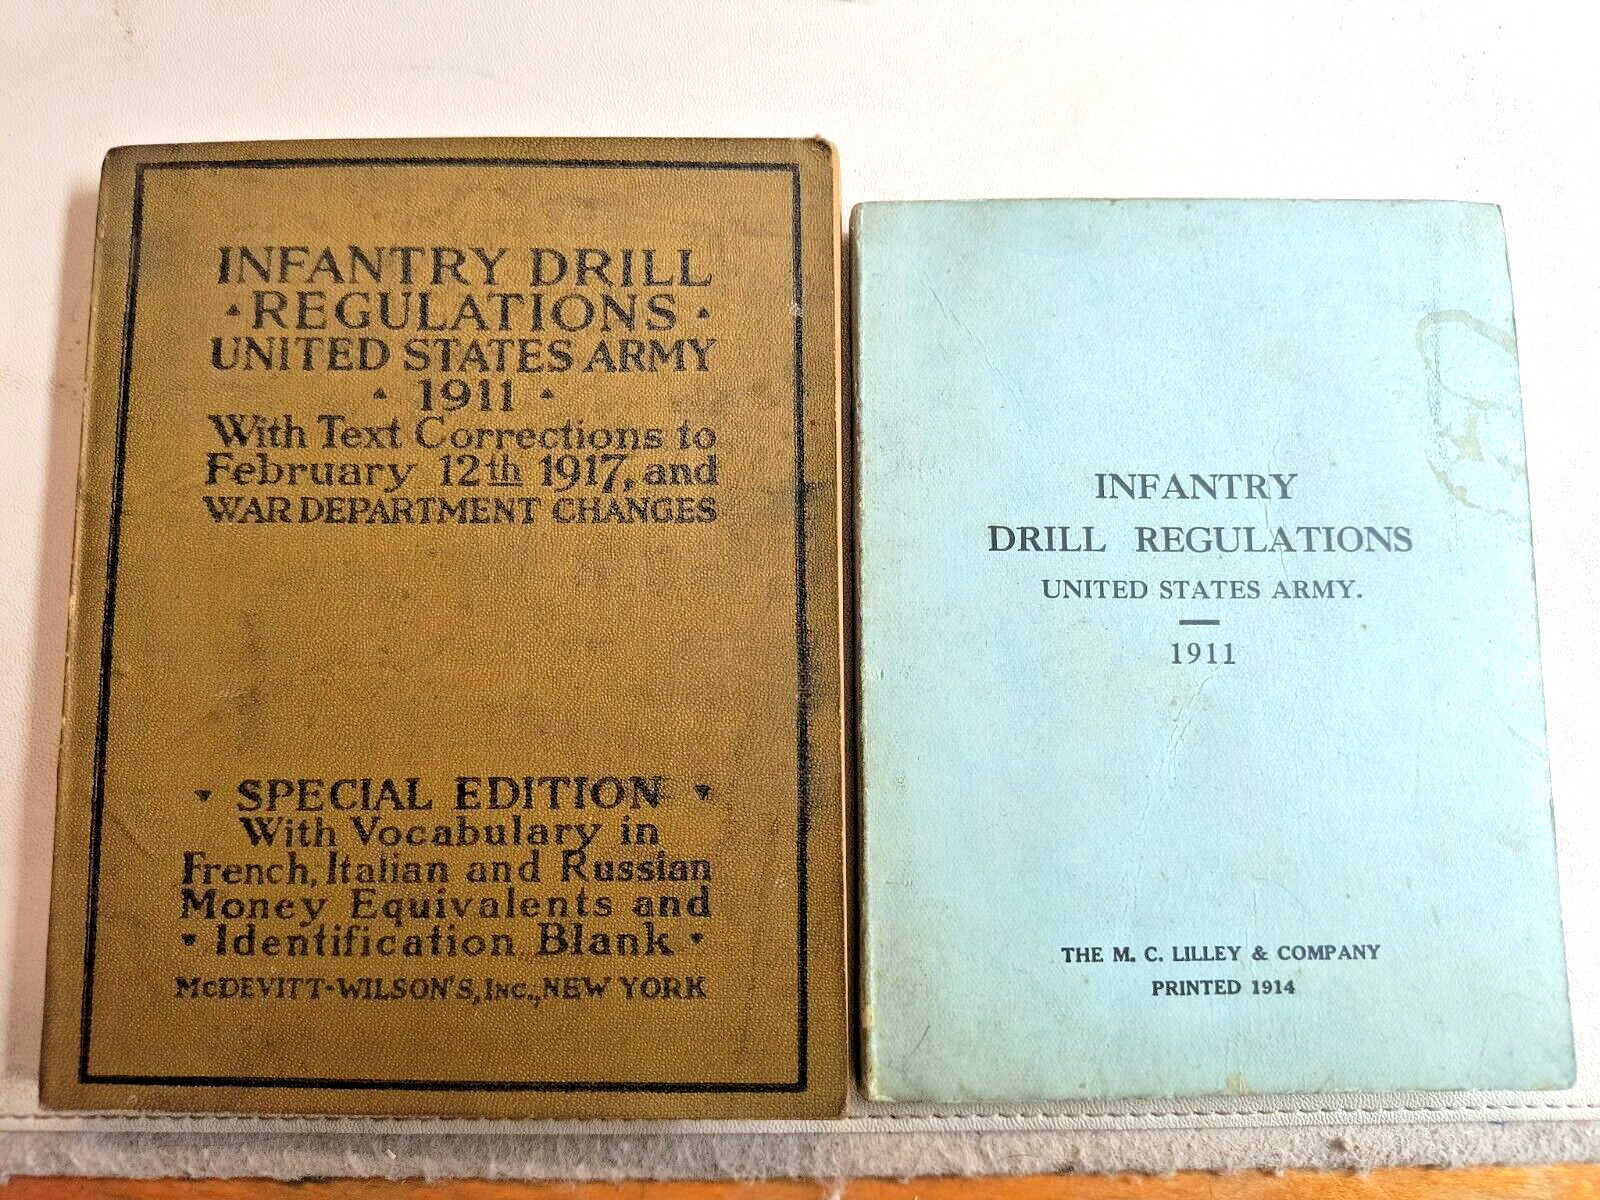 WWI 1911 Infantry Drill Regulations Book US Army Issued 1914 & 1917